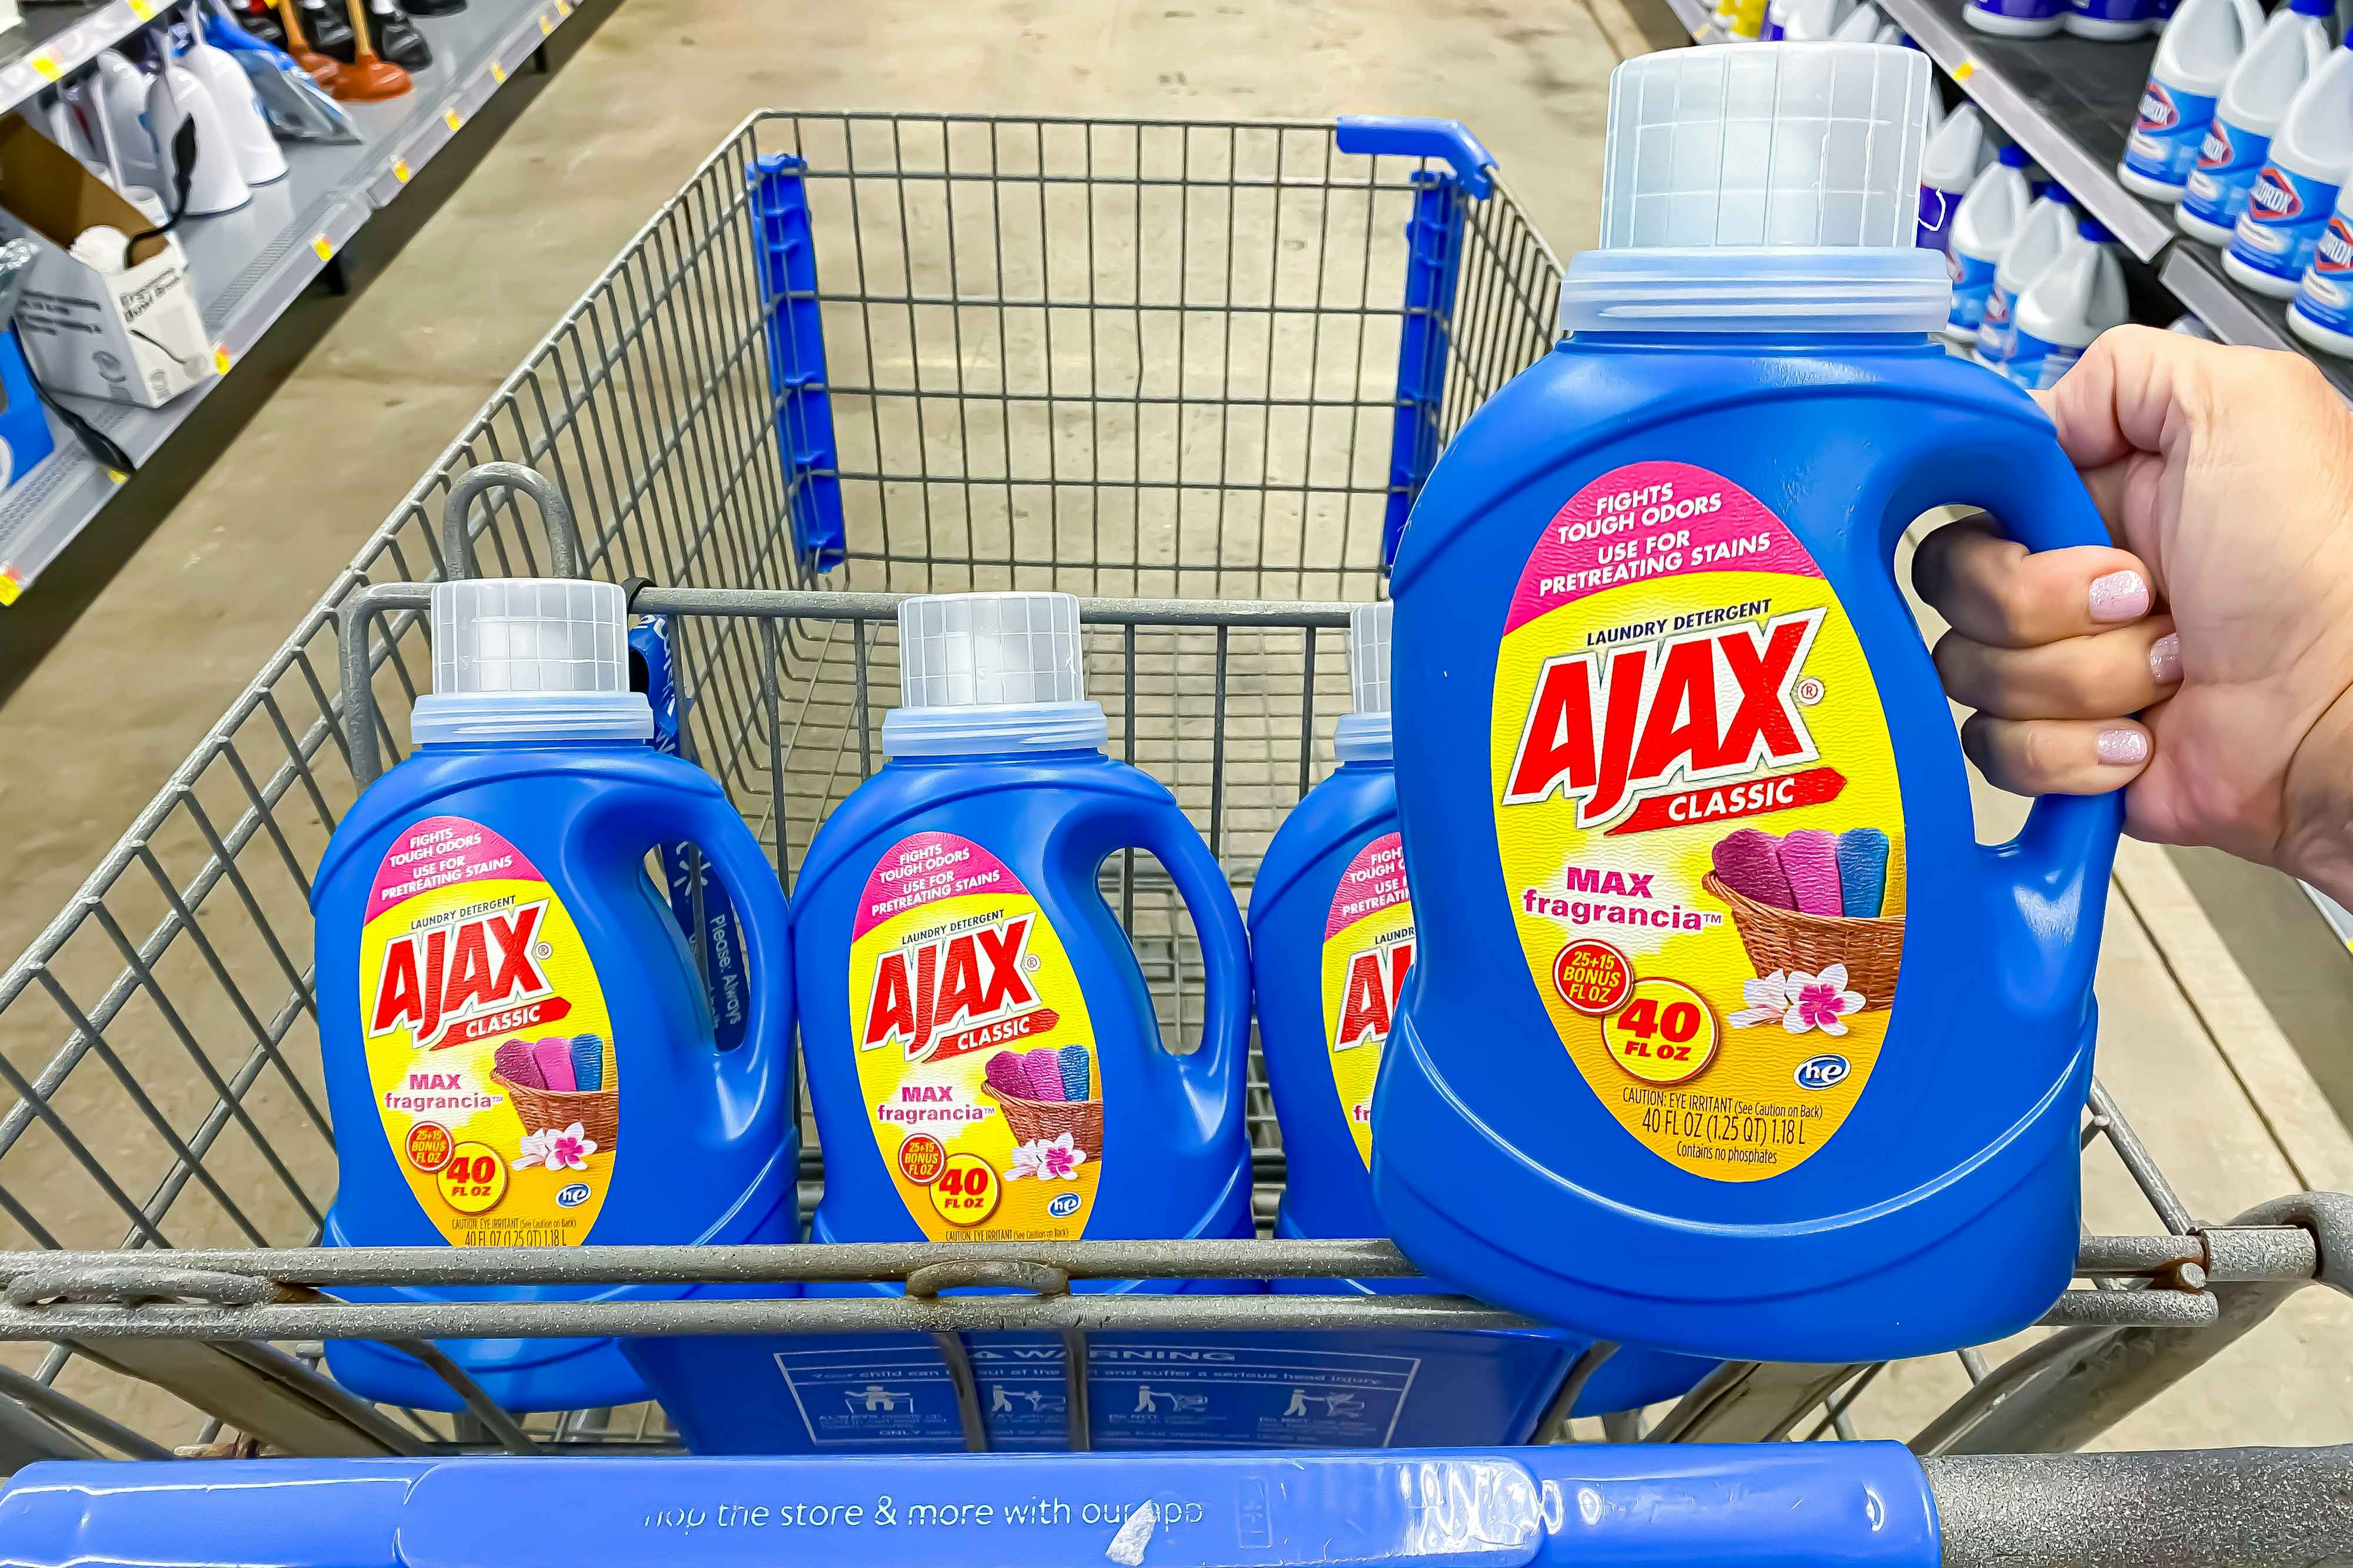 $1.78 Ajax Laundry Detergent at Walmart — Only $0.07 per Load